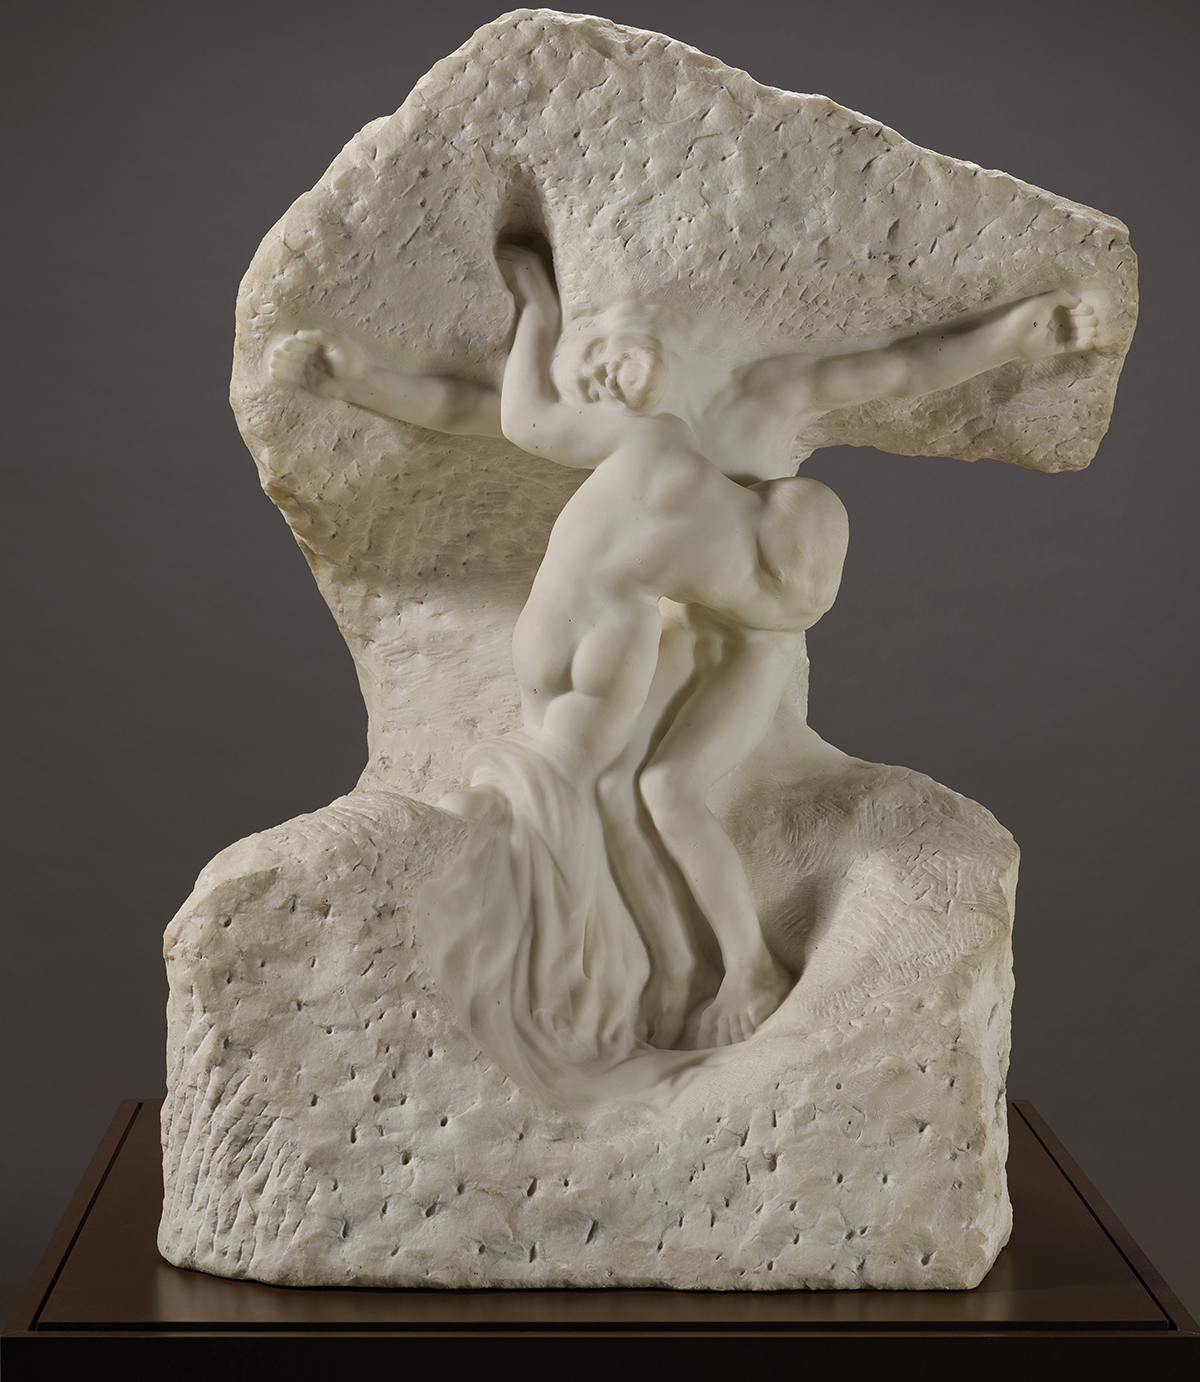 A marble sculpture by Auguste Rodin showing two figures representing Christ and Mary Magdalene.